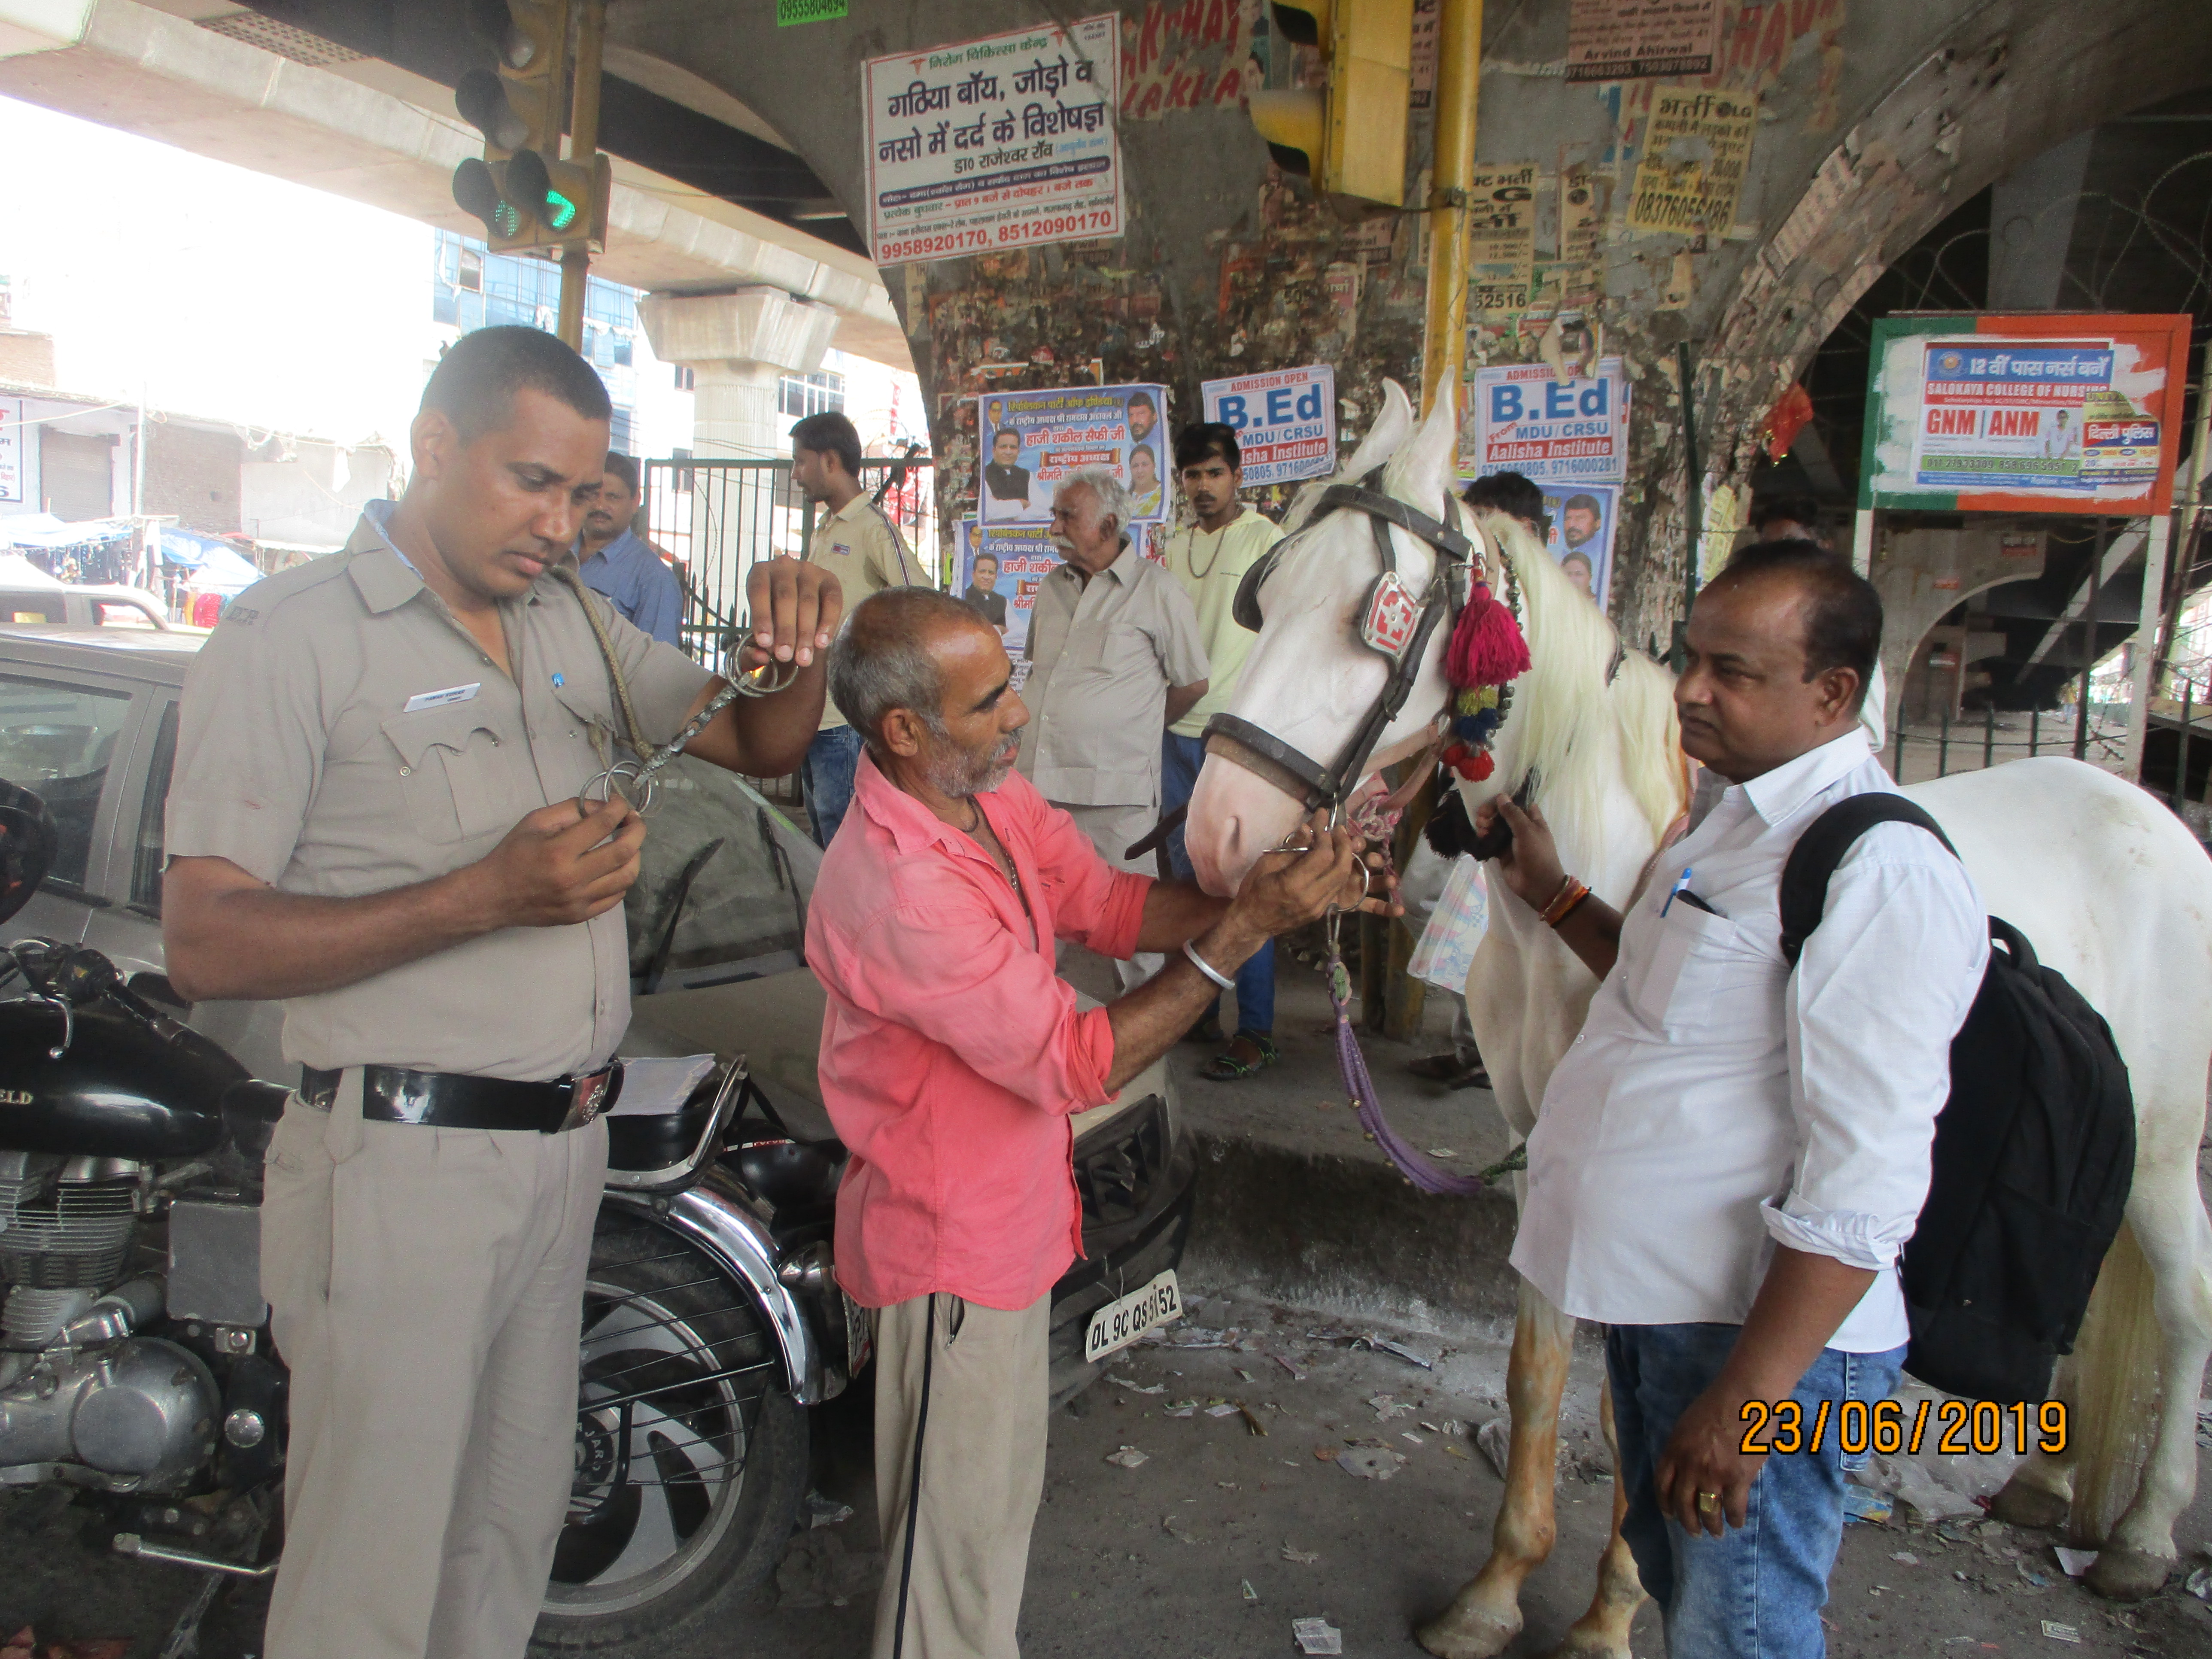 Following PETA India Complaint, Delhi Police Seize Spiked Bits Used to Control Horses in Weddings